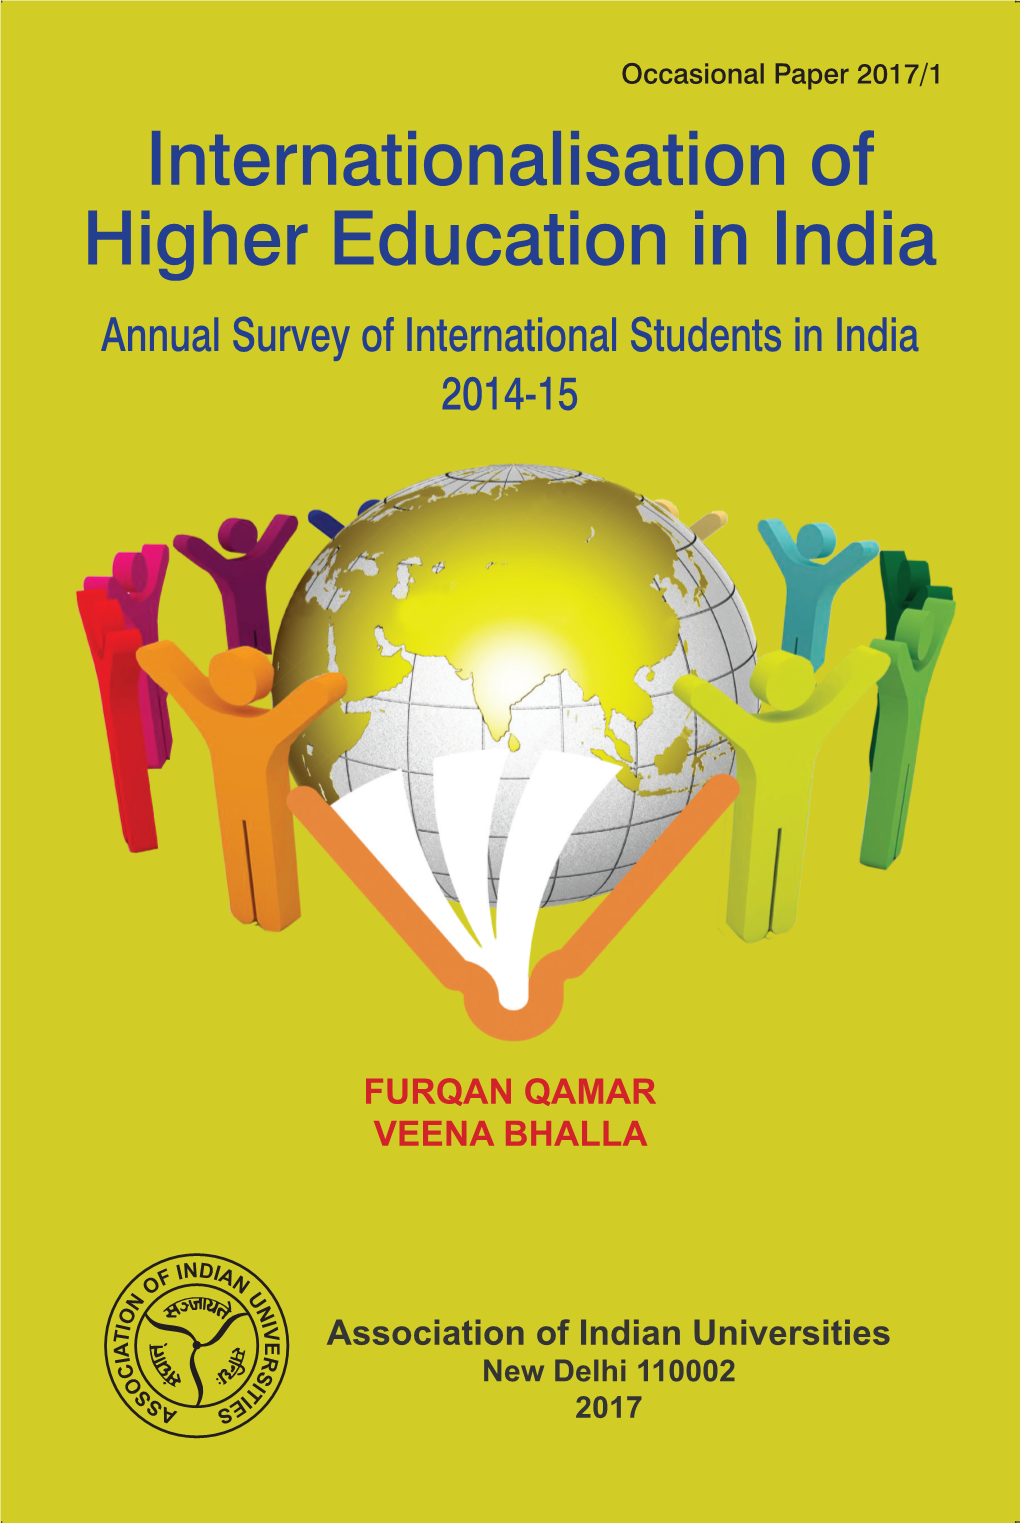 Annual Survey of International Students in India 2014-15